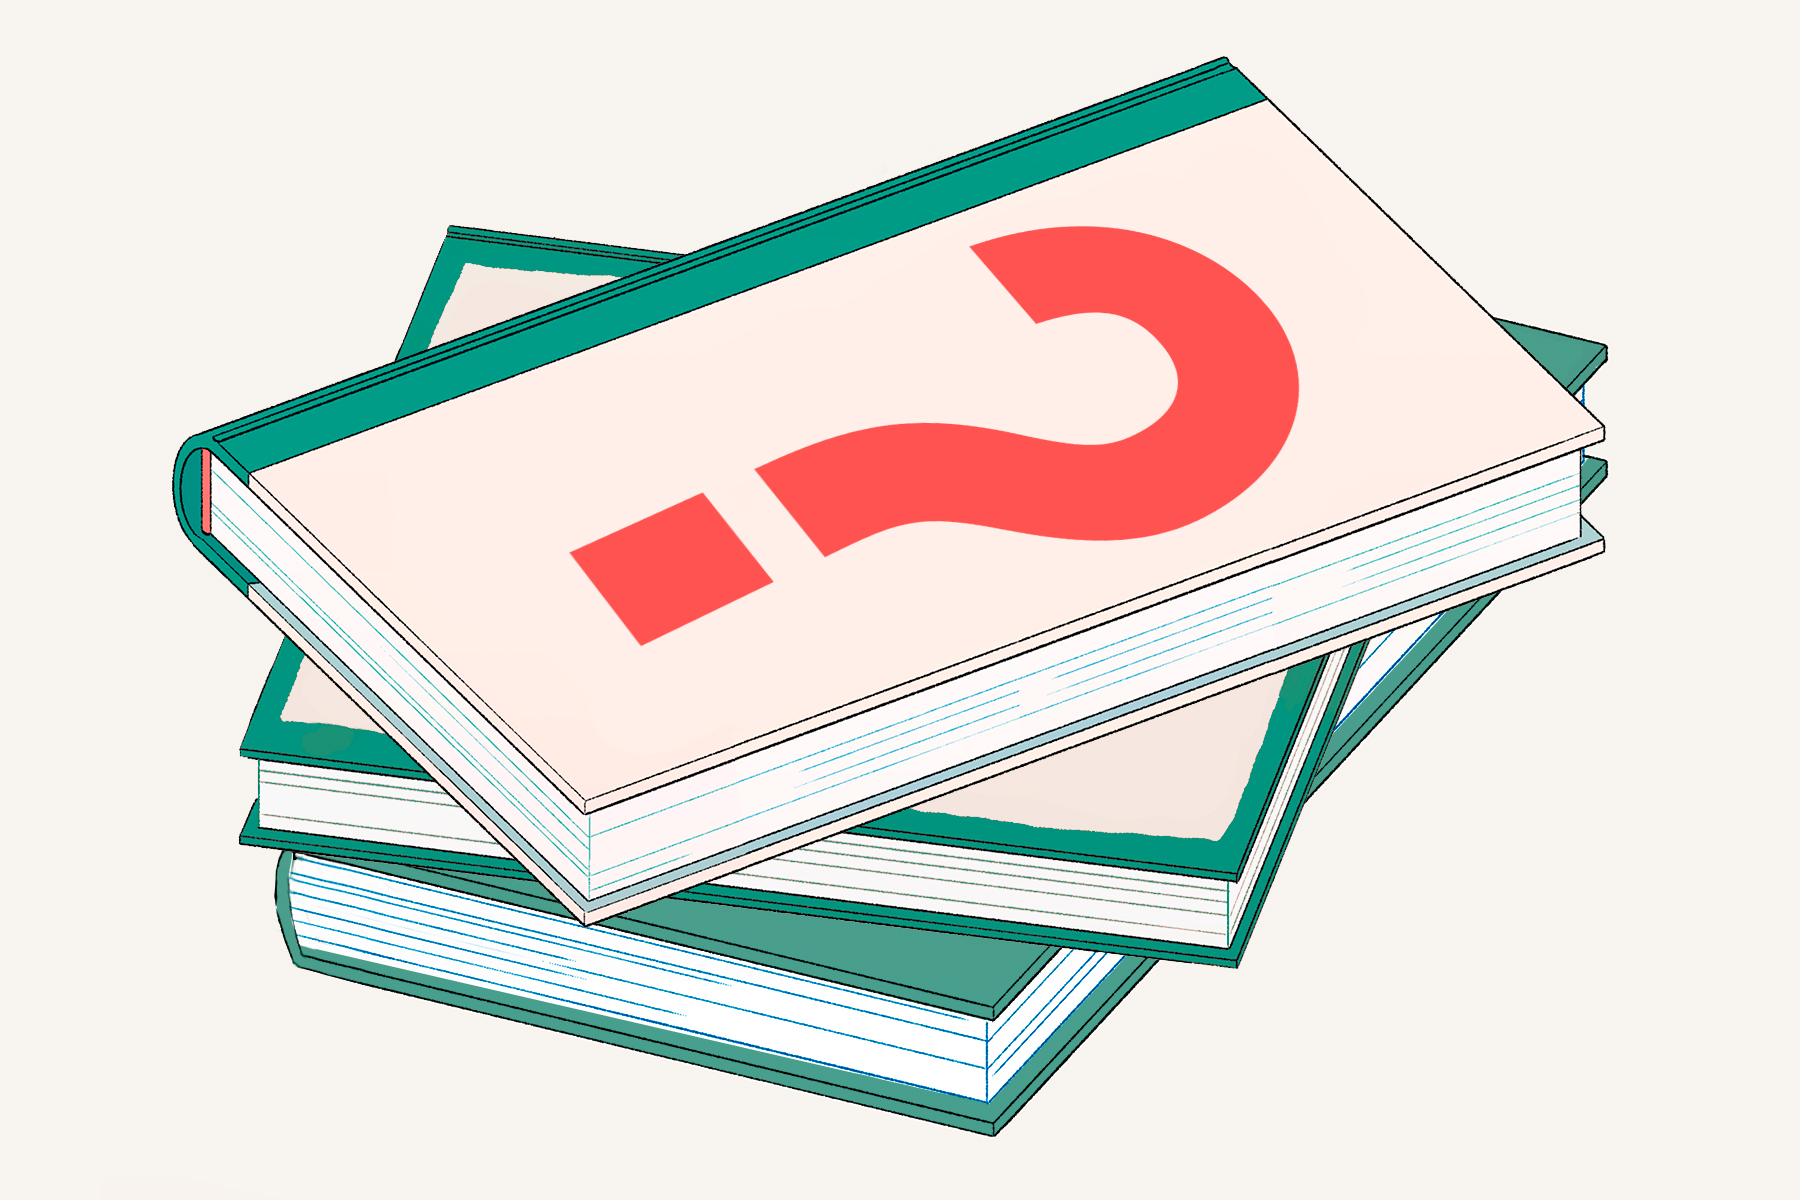 An illustration of a pile of books, with a red question mark on the top one.